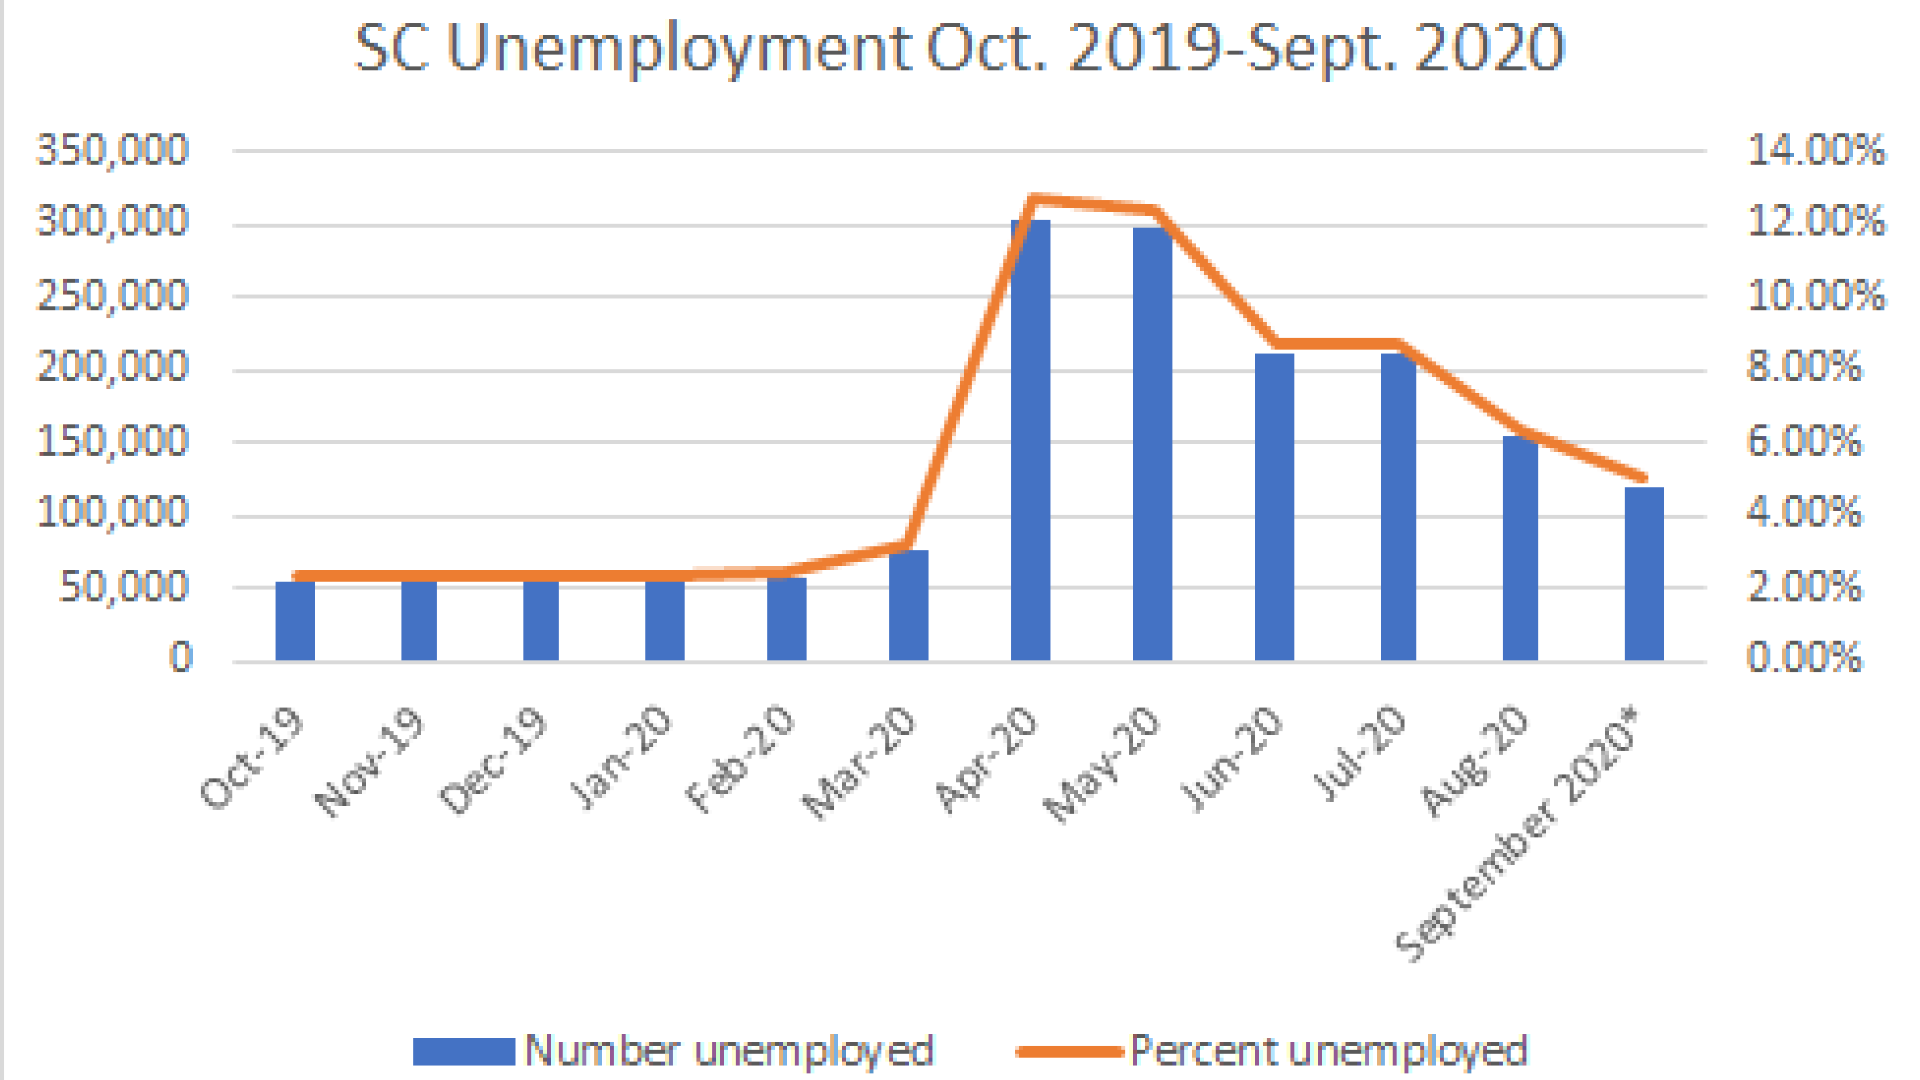 South Carolina unemployment numbers maintain downward slope